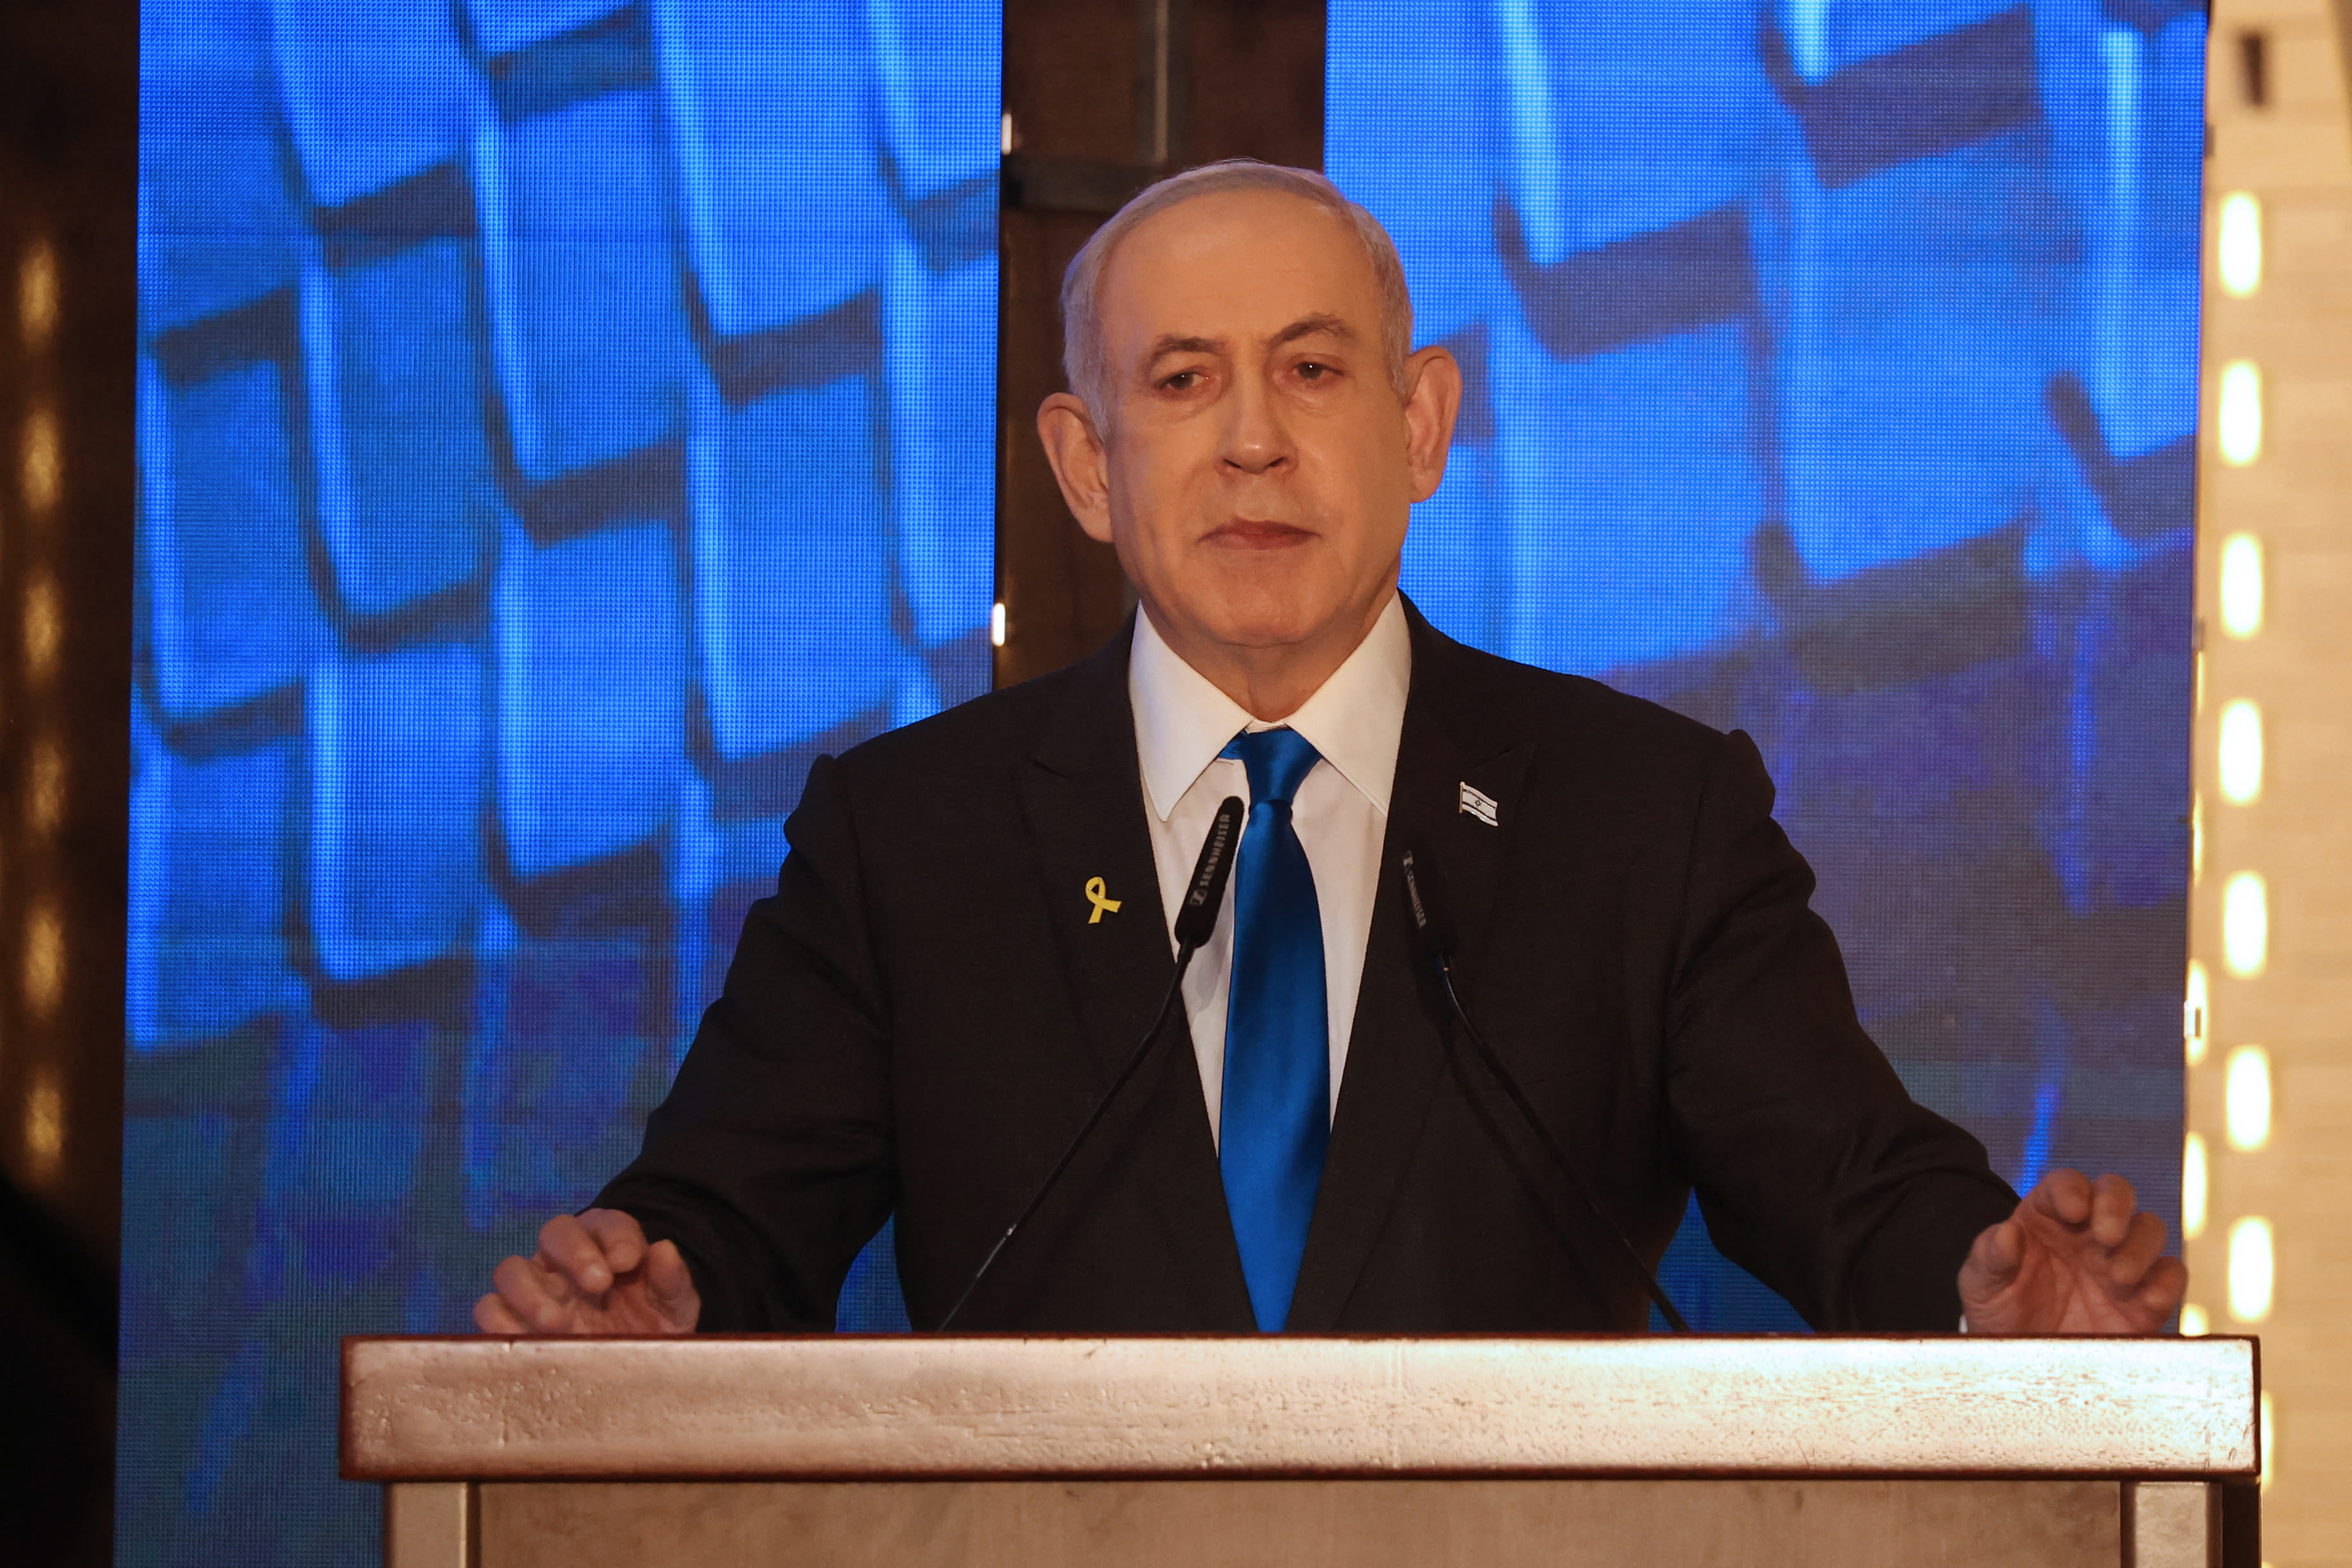 Map shows countries Israel's Netanyahu could be blocked from visiting